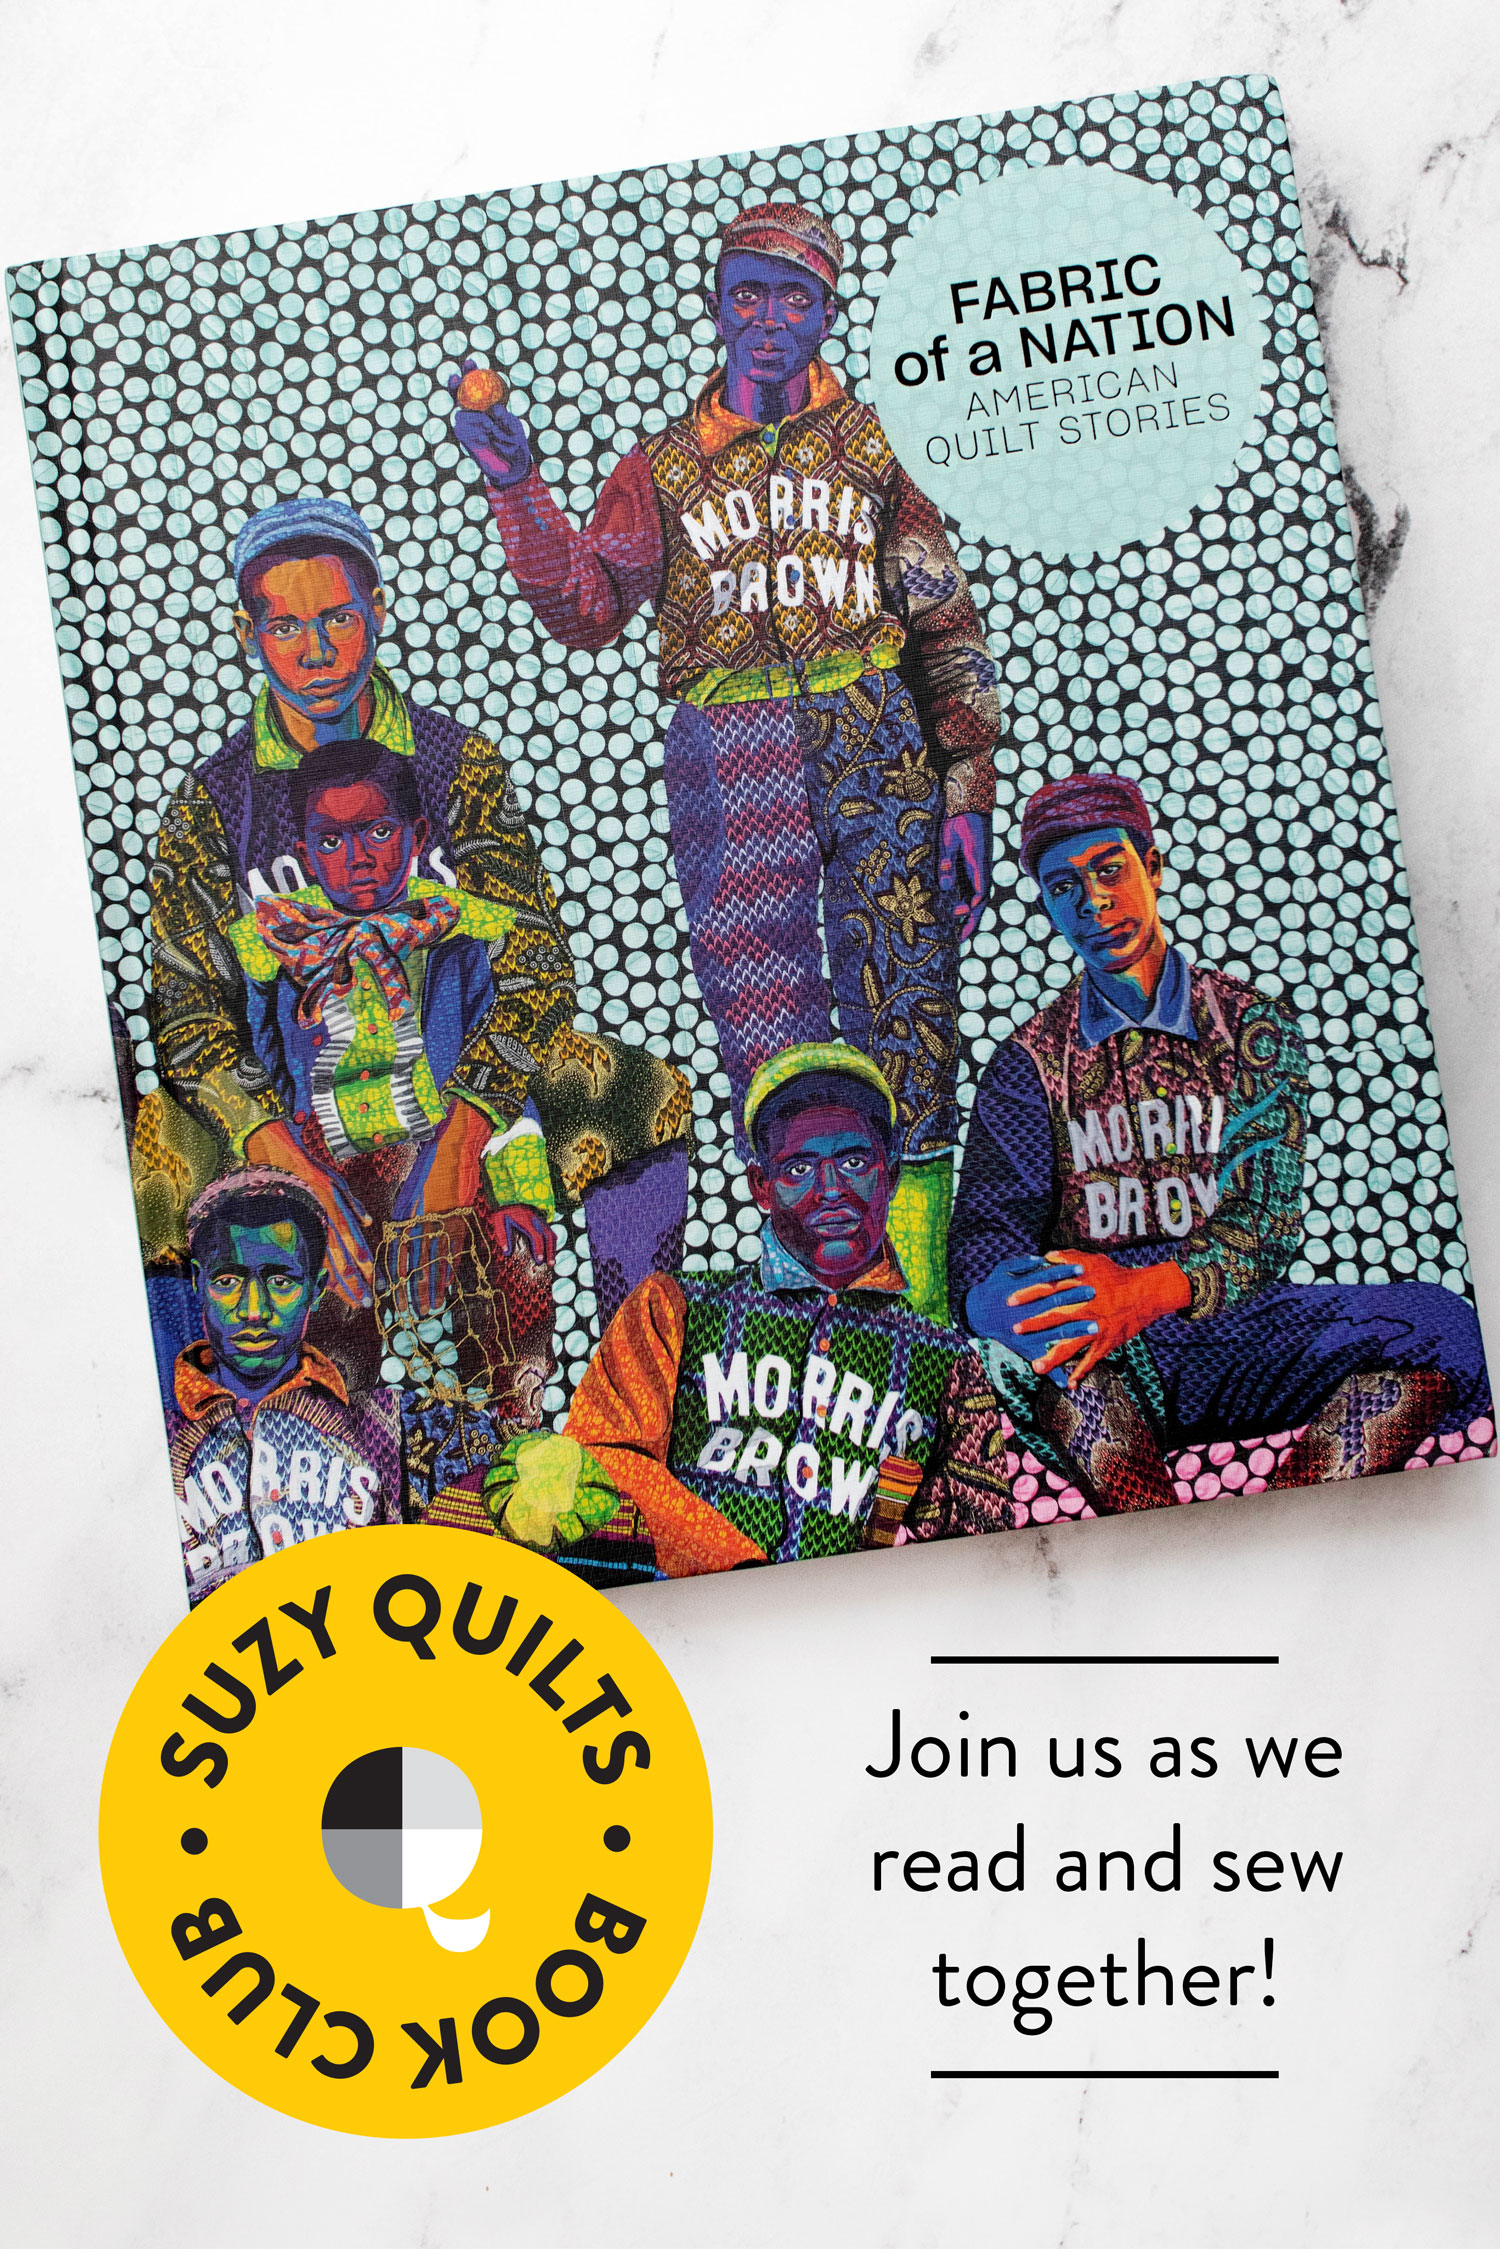 Join us for Part One of our Suzy Quilts Book Club discussion for the book Fabric of a Nation! suzyquilts.com #quilting #quilthistory